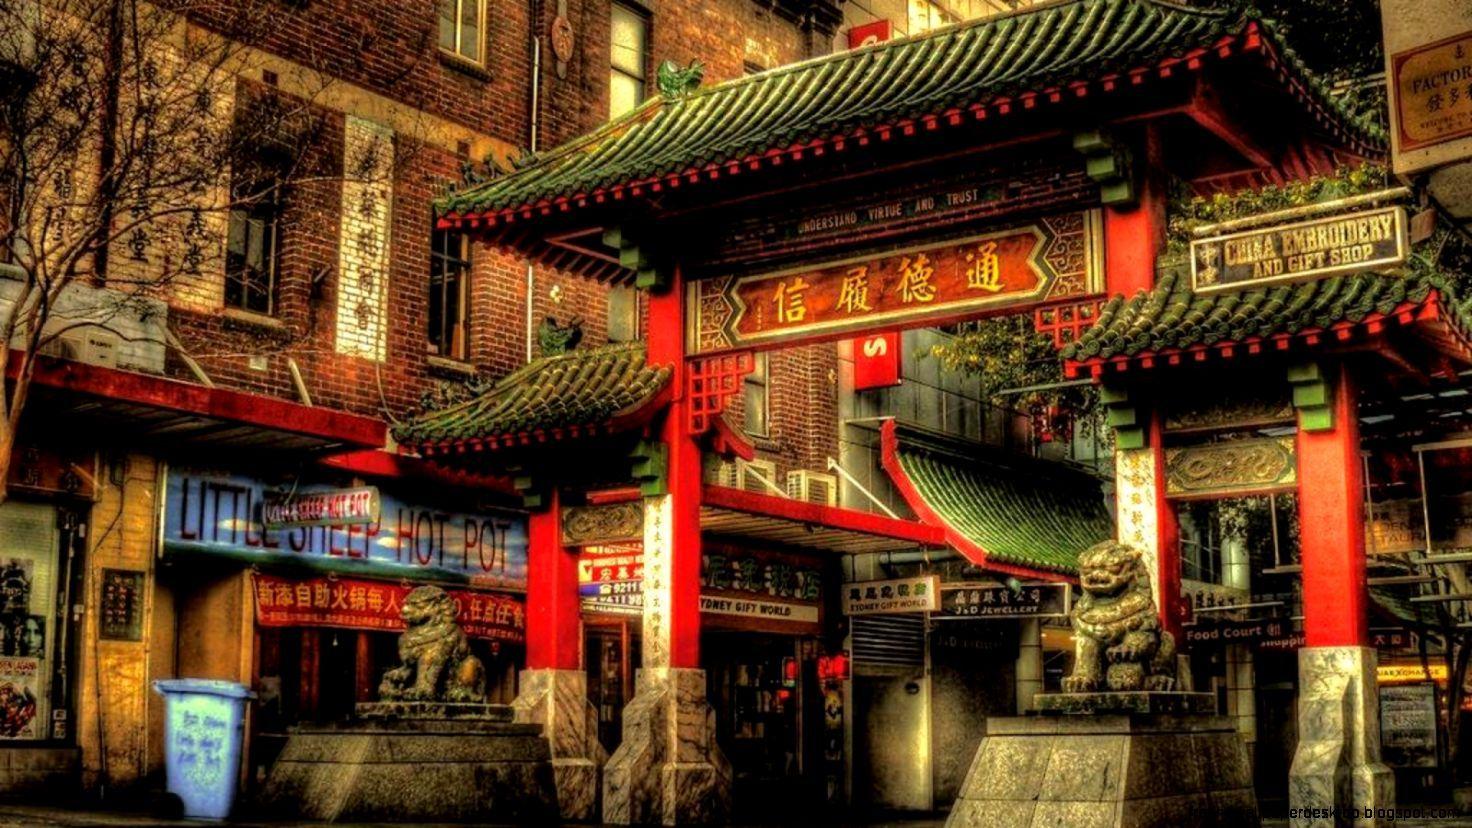 china town» 1080P, 2k, 4k HD wallpapers, backgrounds free download | Rare  Gallery